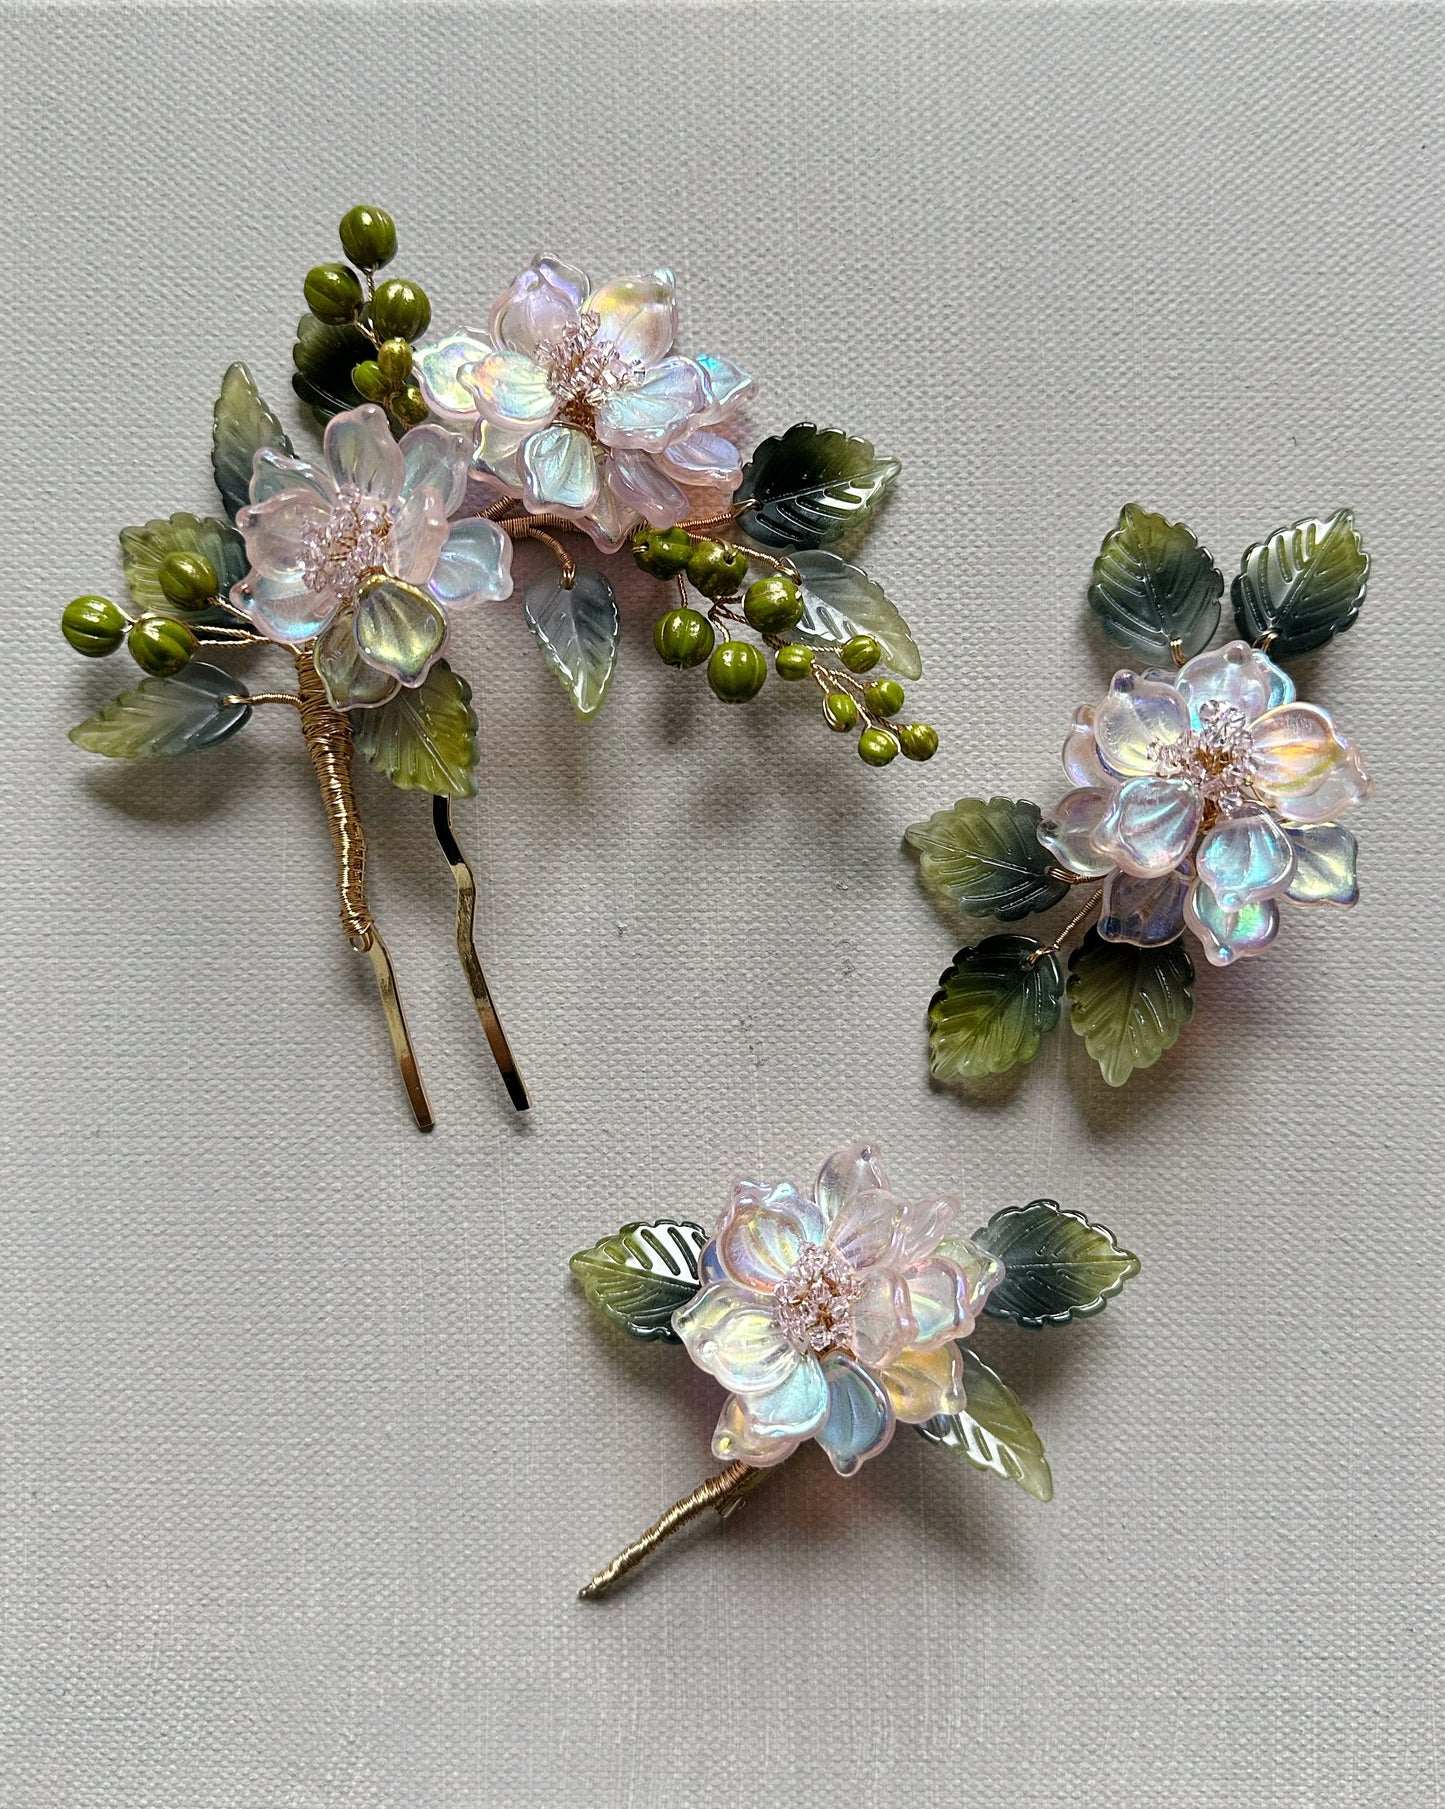 The new peony lapel brooch in AB pink